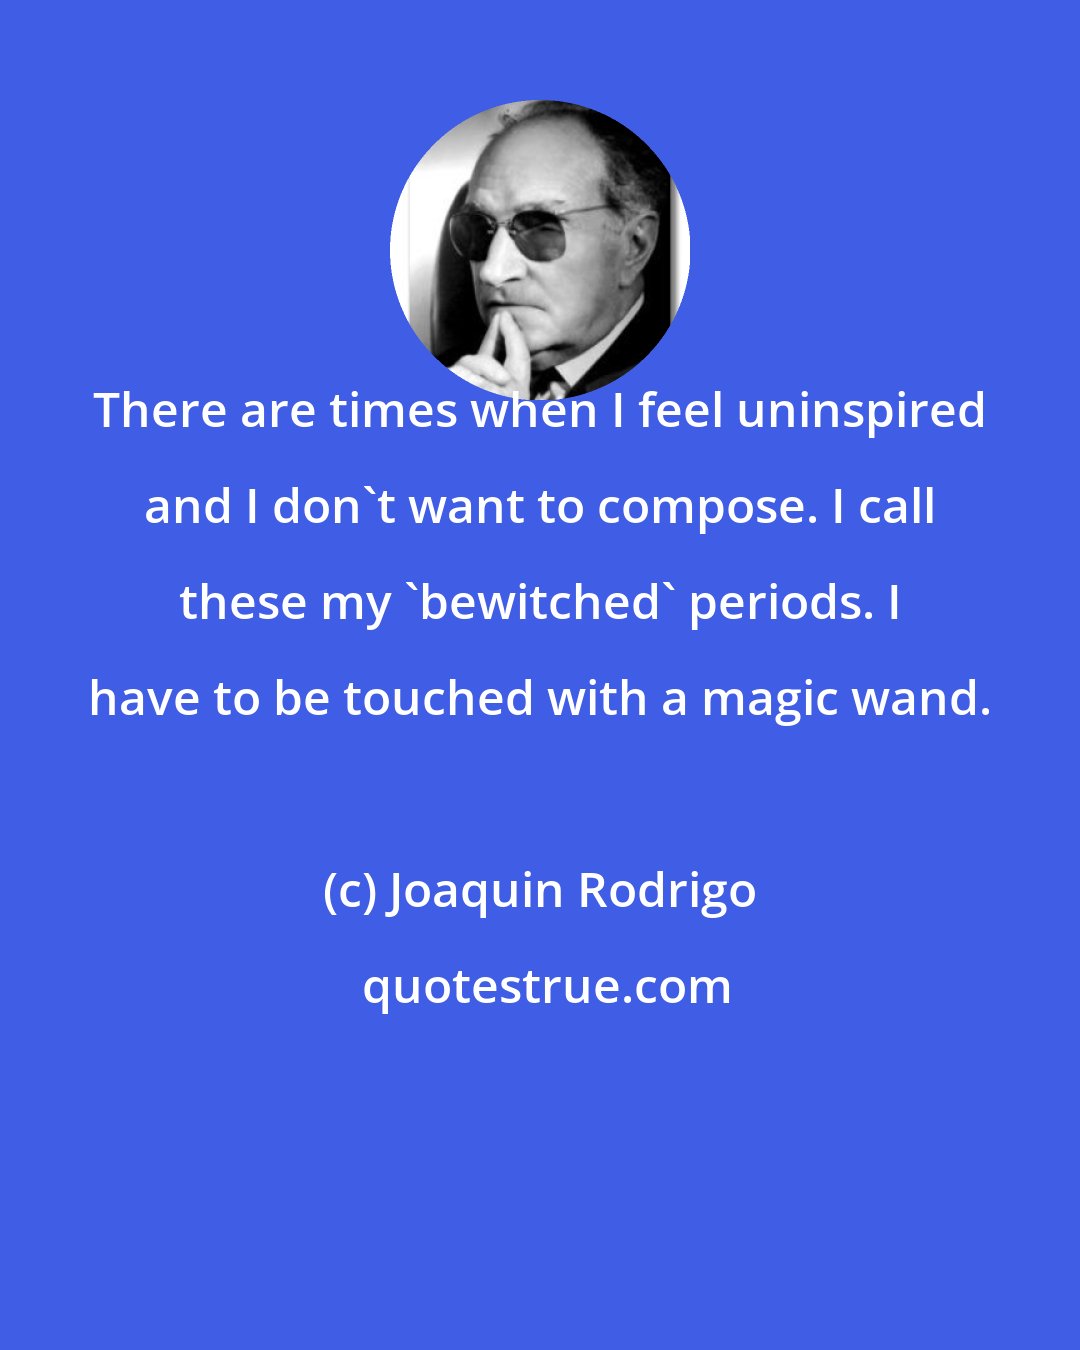 Joaquin Rodrigo: There are times when I feel uninspired and I don't want to compose. I call these my 'bewitched' periods. I have to be touched with a magic wand.